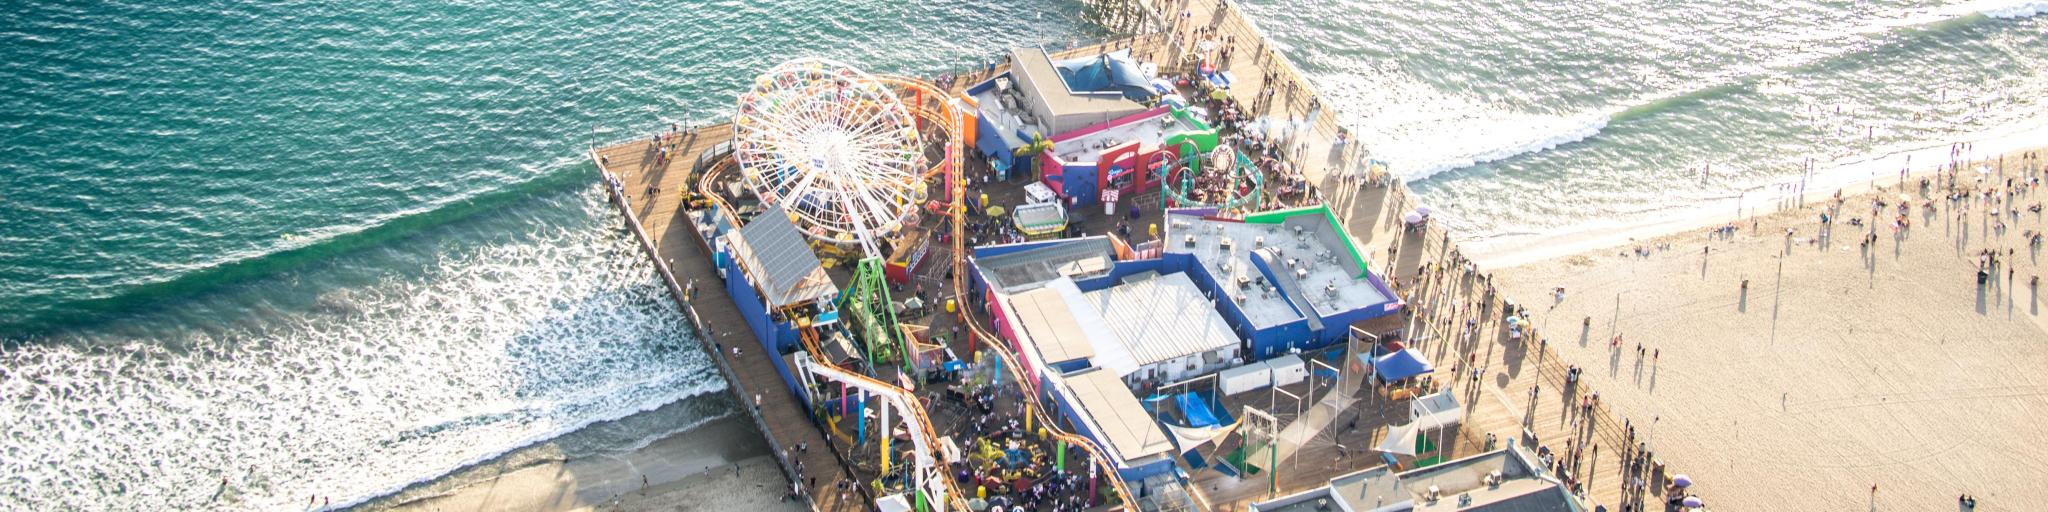 Drone daytime view of busy Santa Monica Pier